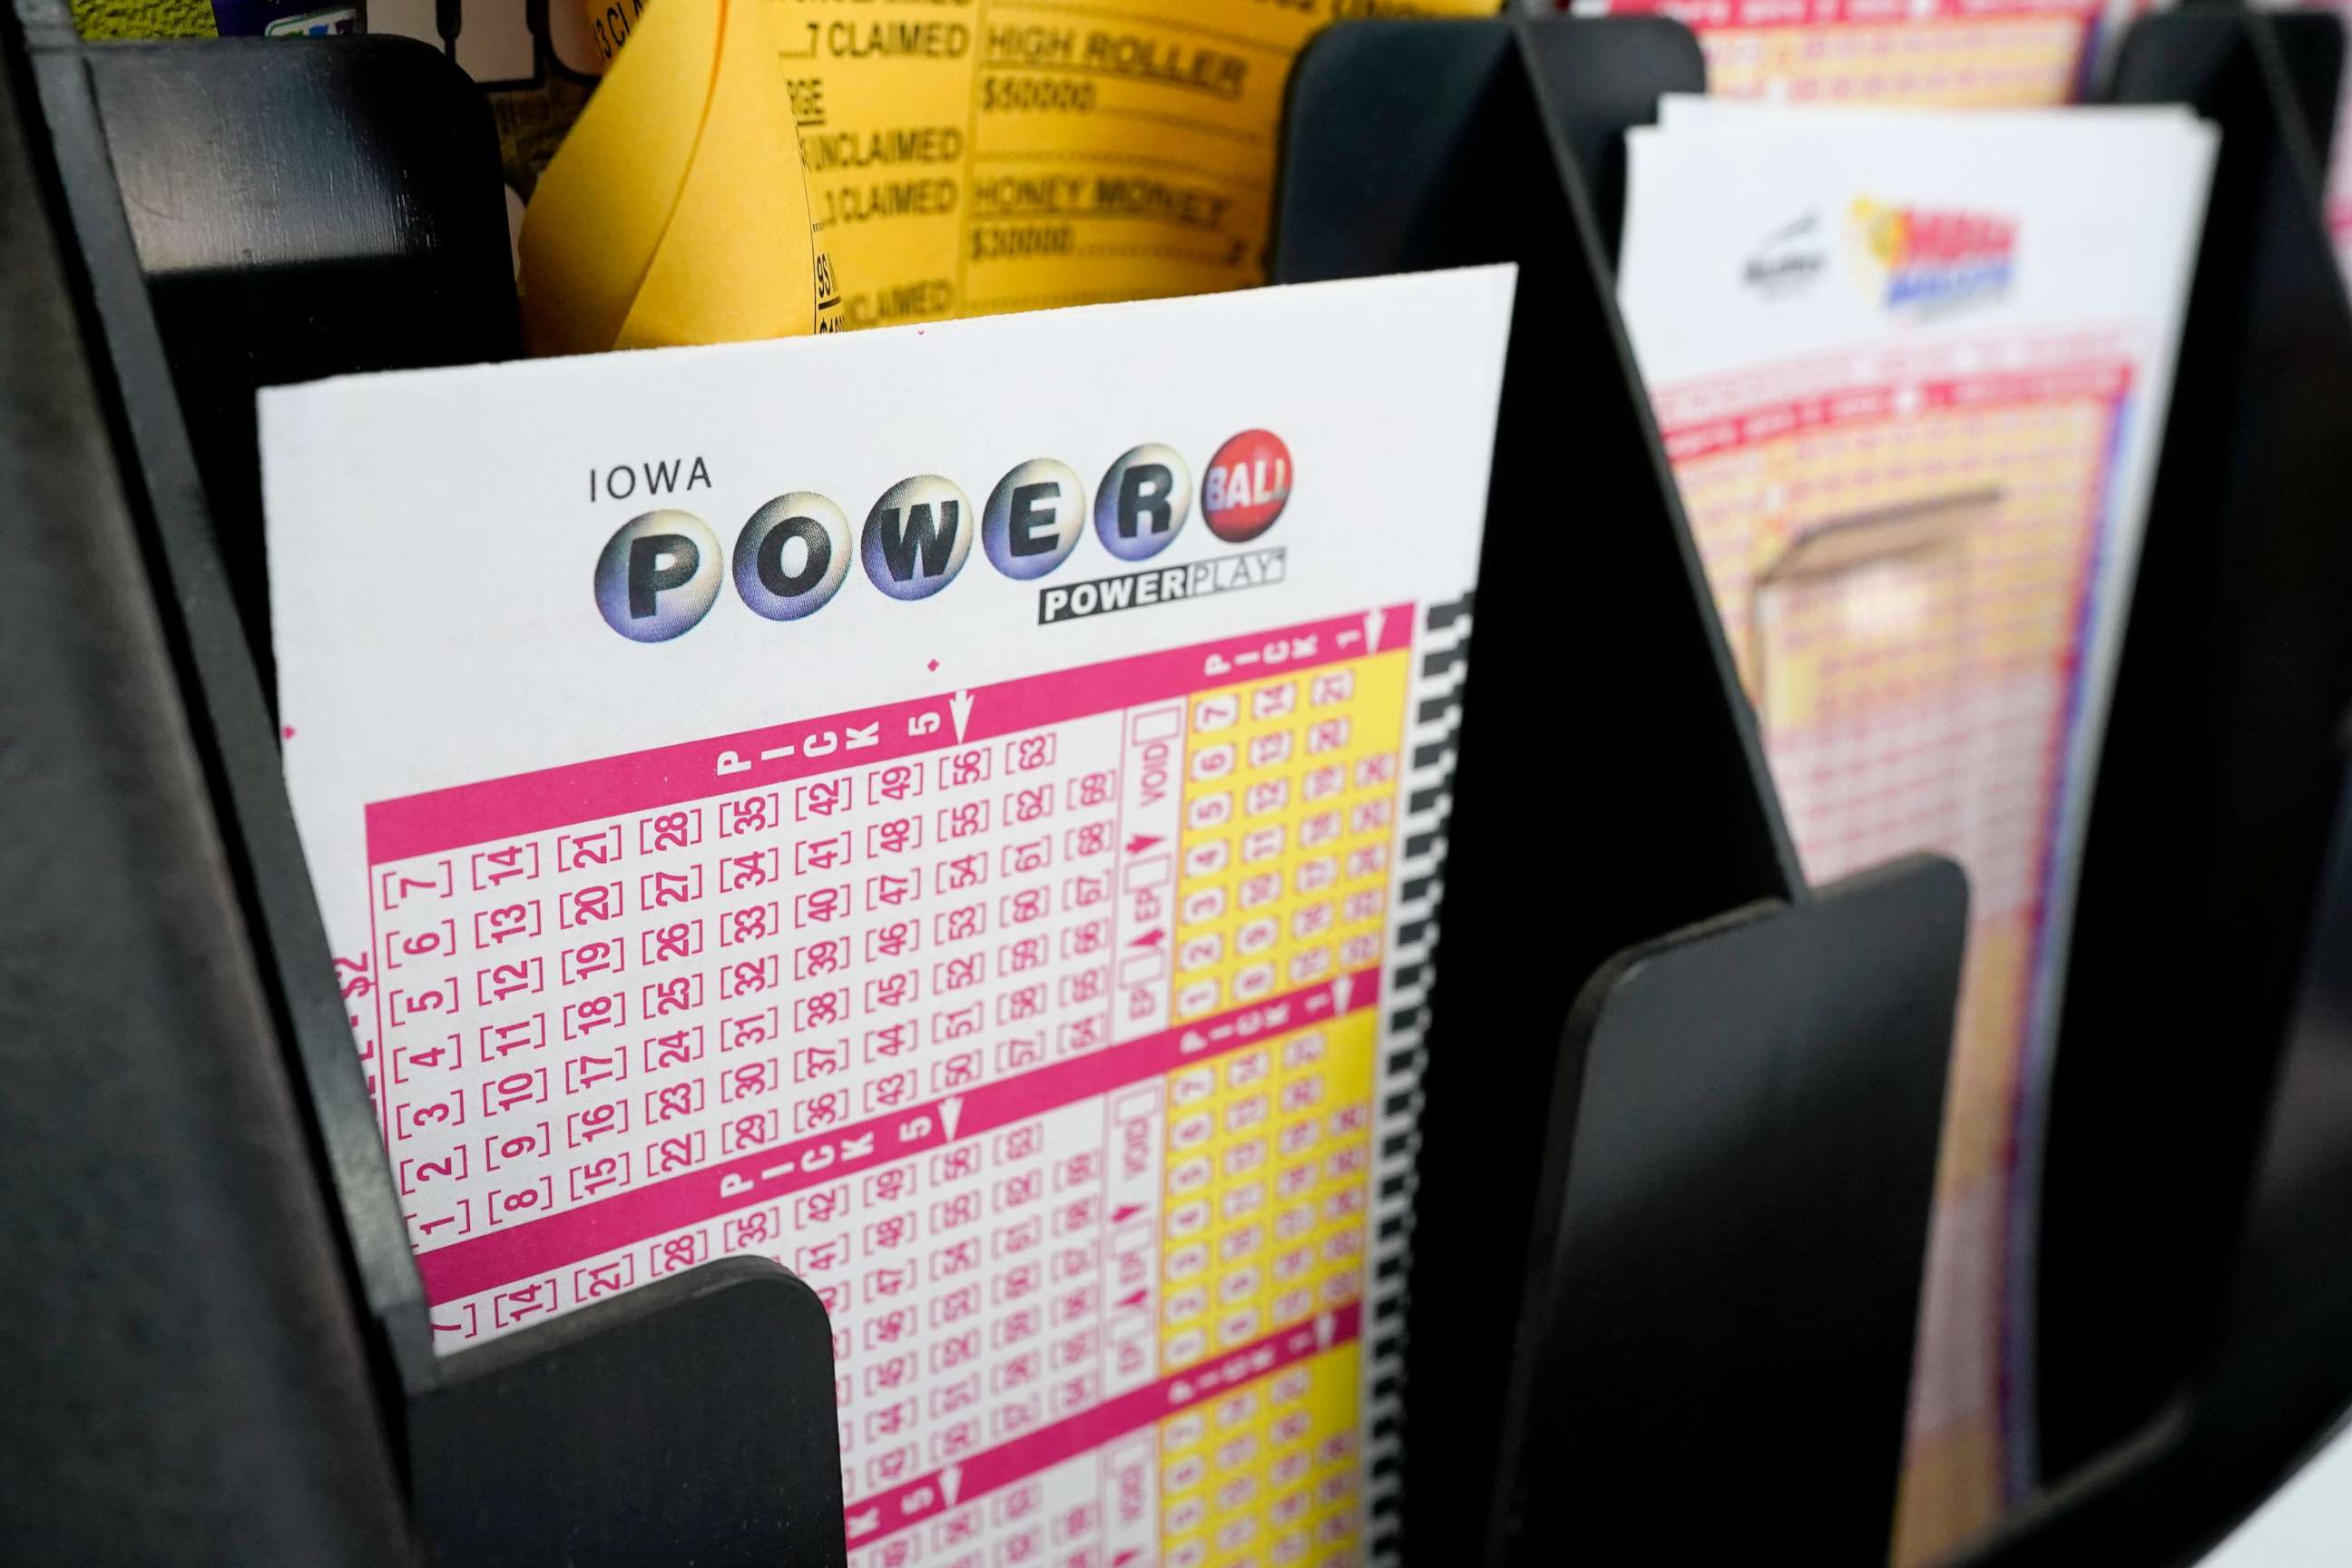 Powerball jackpot $650 million, second largest of all time